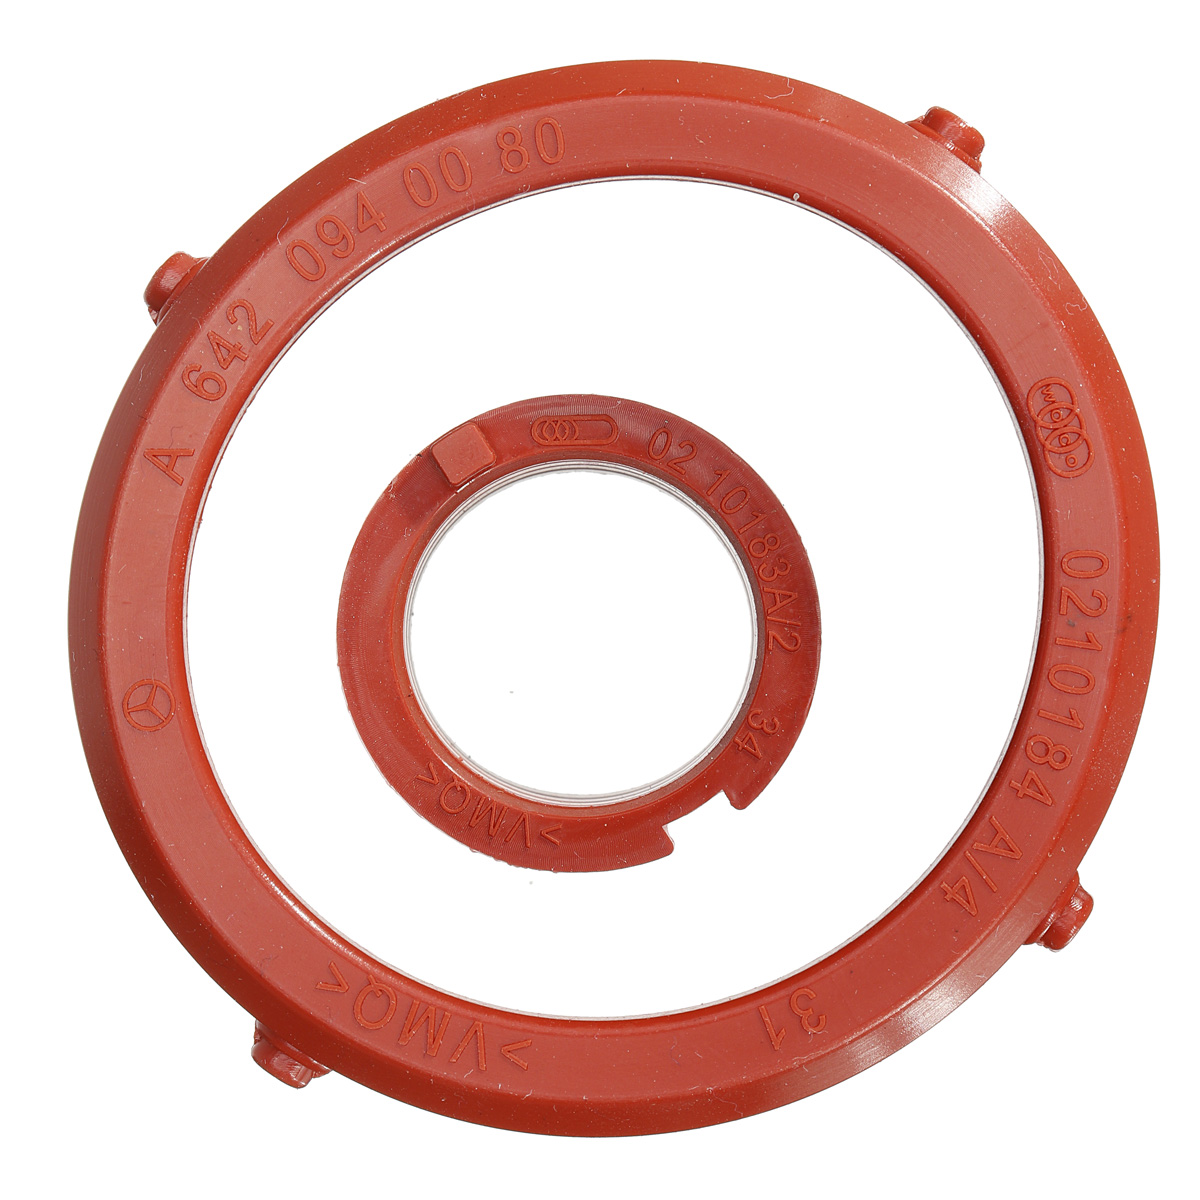 2pcs-Red-Turbo--Breather-Intake-Seal-Kit-For-Mercedes-Benz-OM642-A6420940080-A6420940580-1747599-6